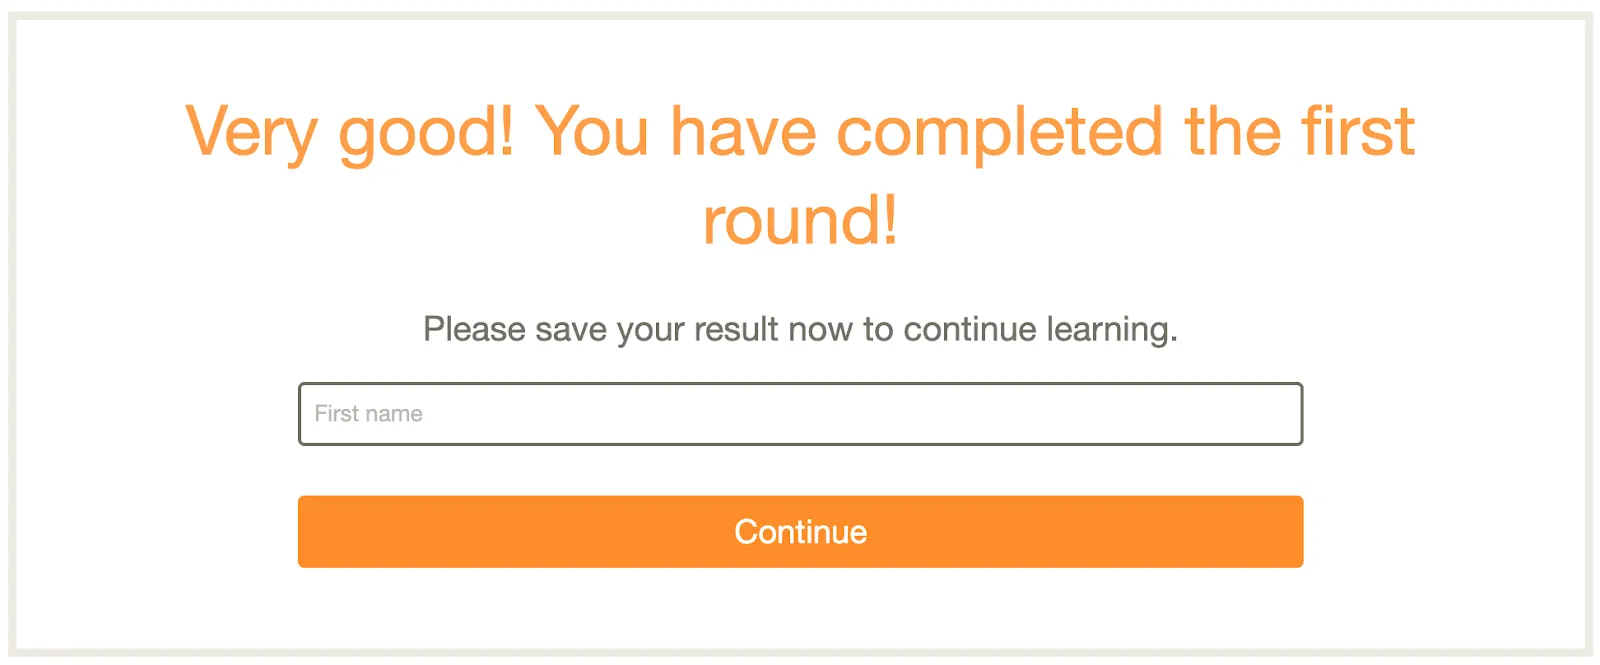 screenshot of babbel showing completion of first round of learning to use the app